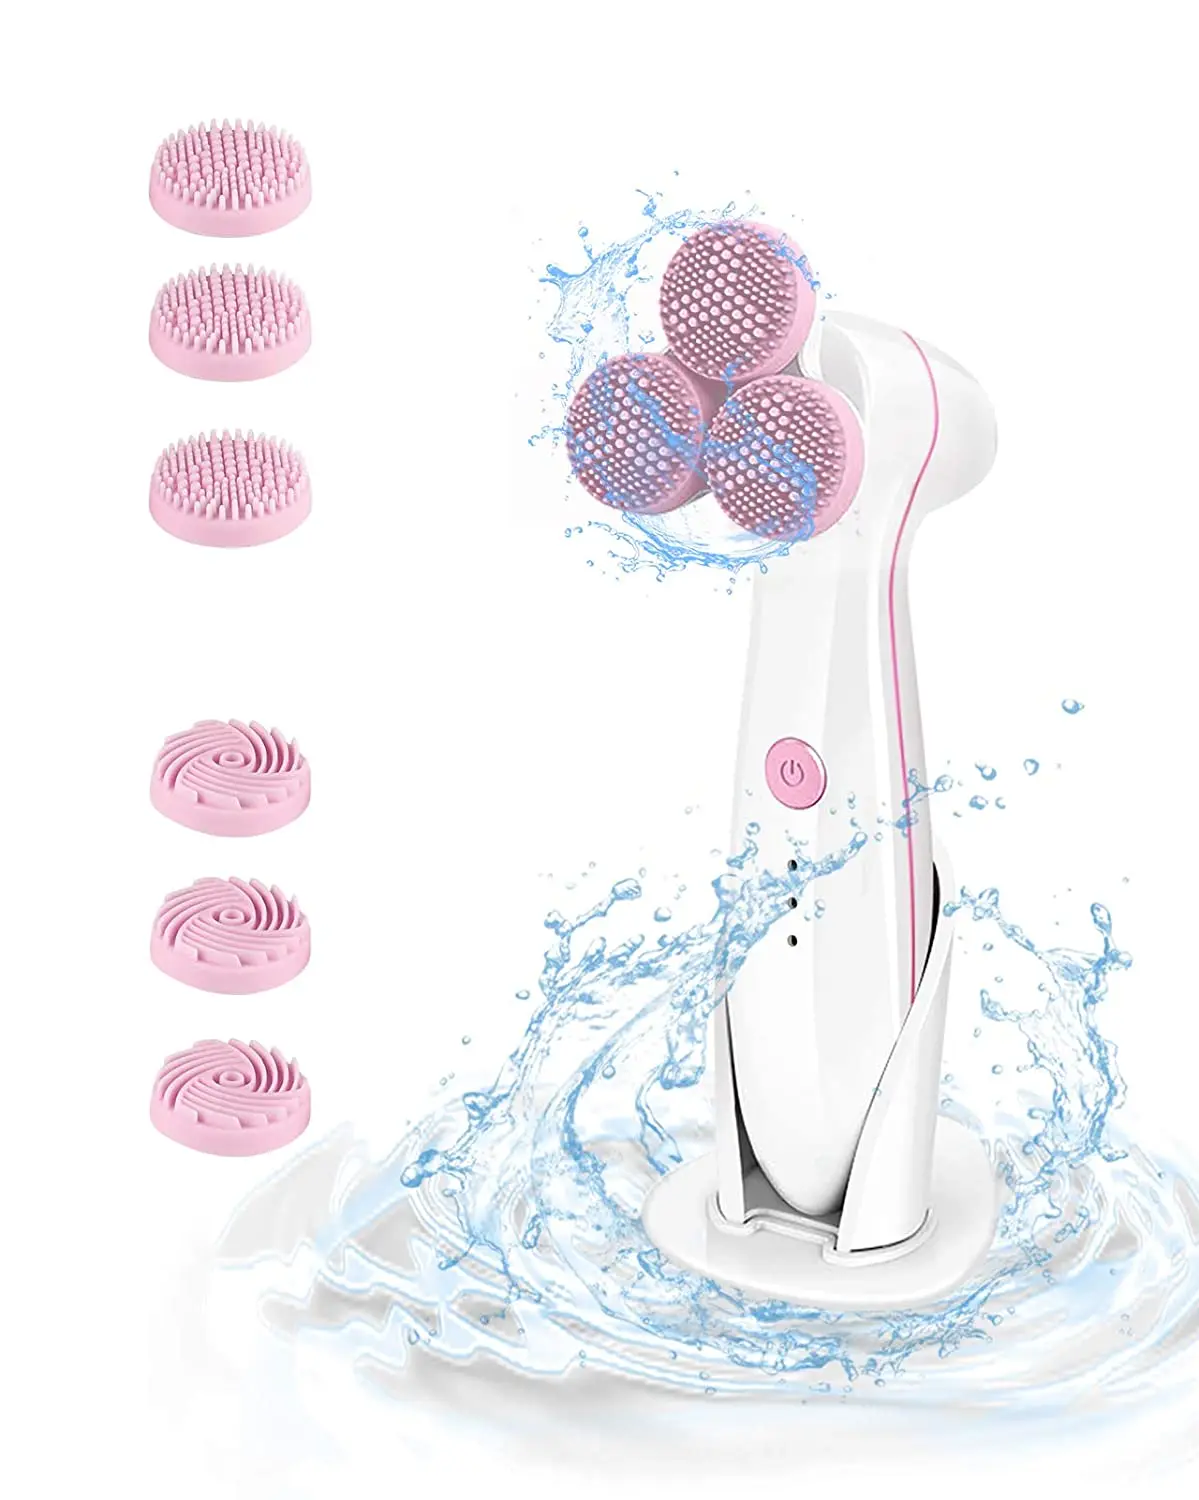 

2021 amazon silicone face brush sonic electric facial cleansing brush device with case wholesale for sale, Blue, pink